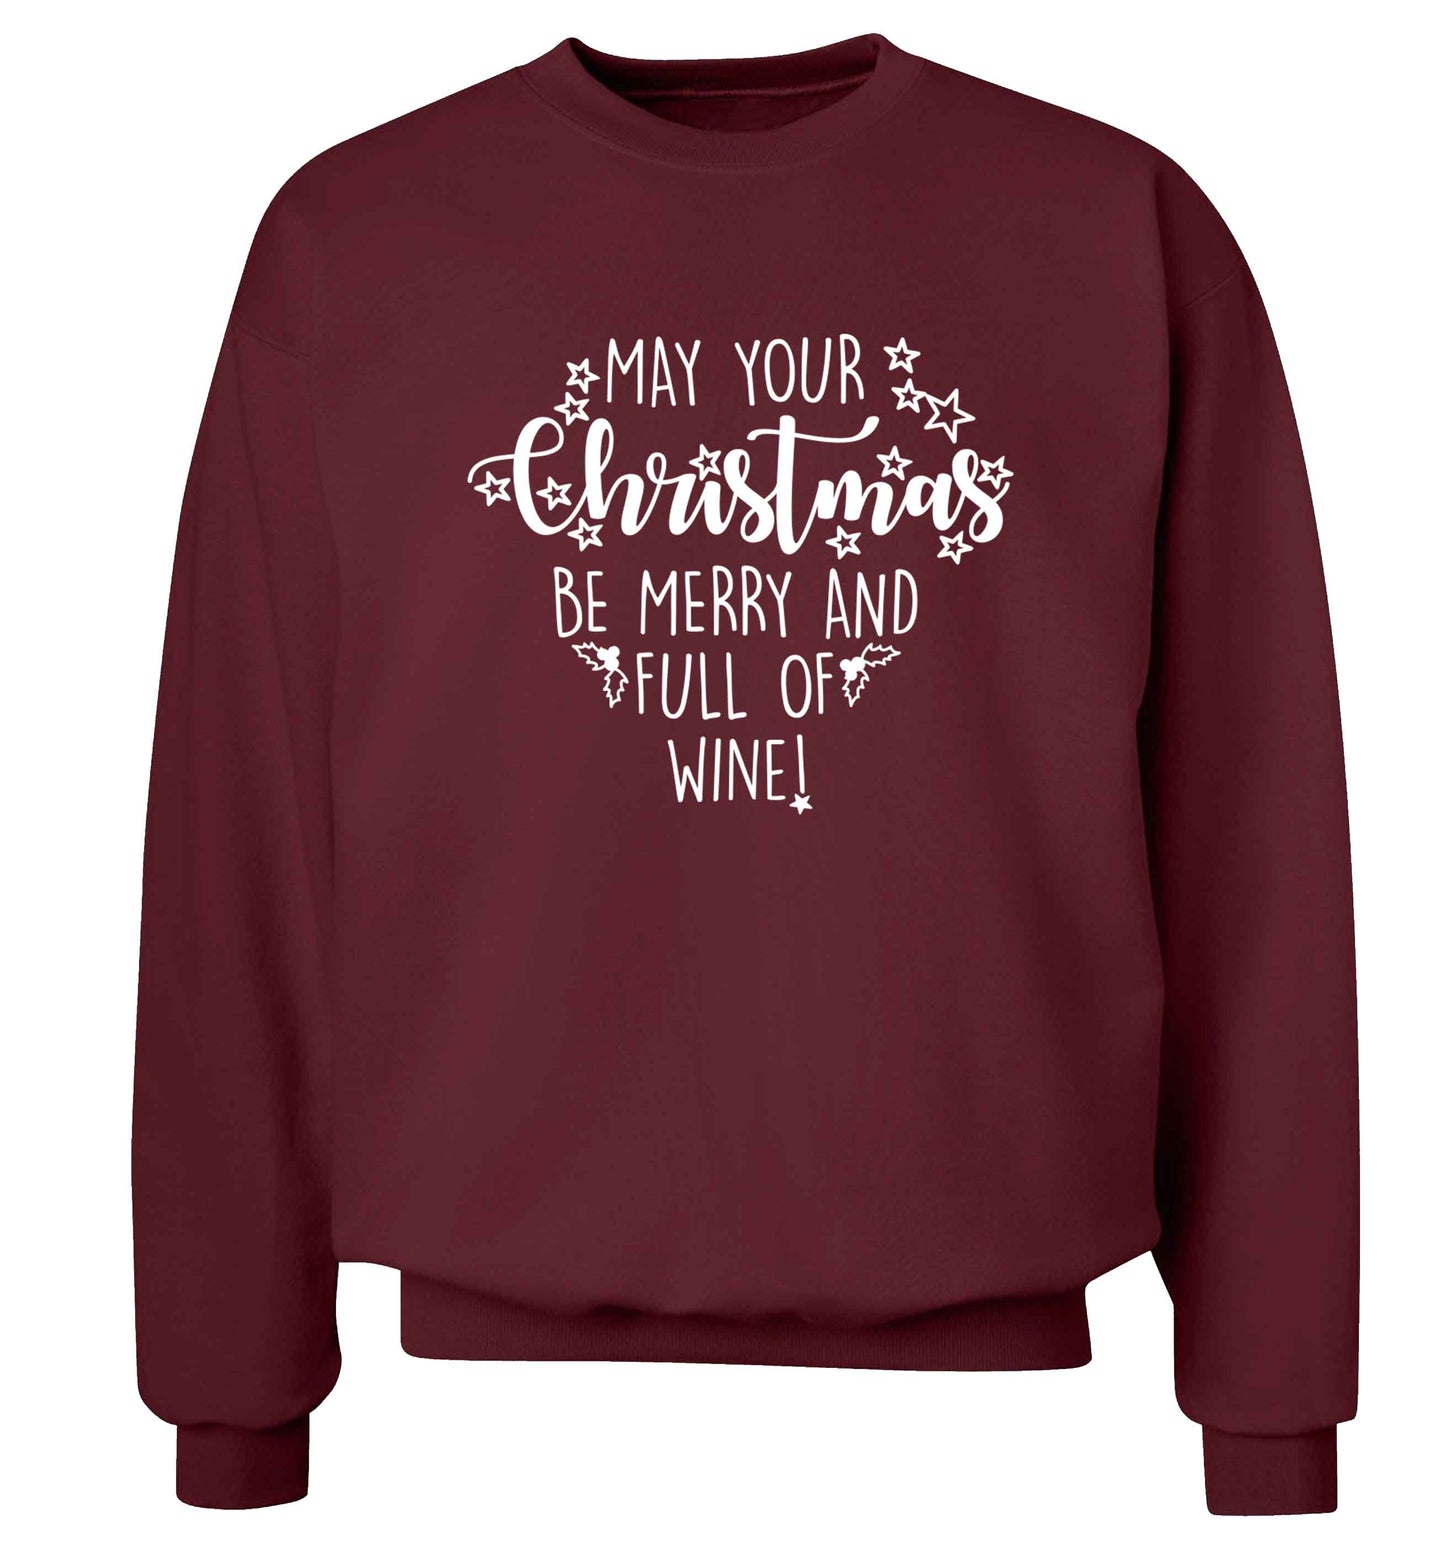 May your Christmas be merry and full of wine Adult's unisex maroon Sweater 2XL